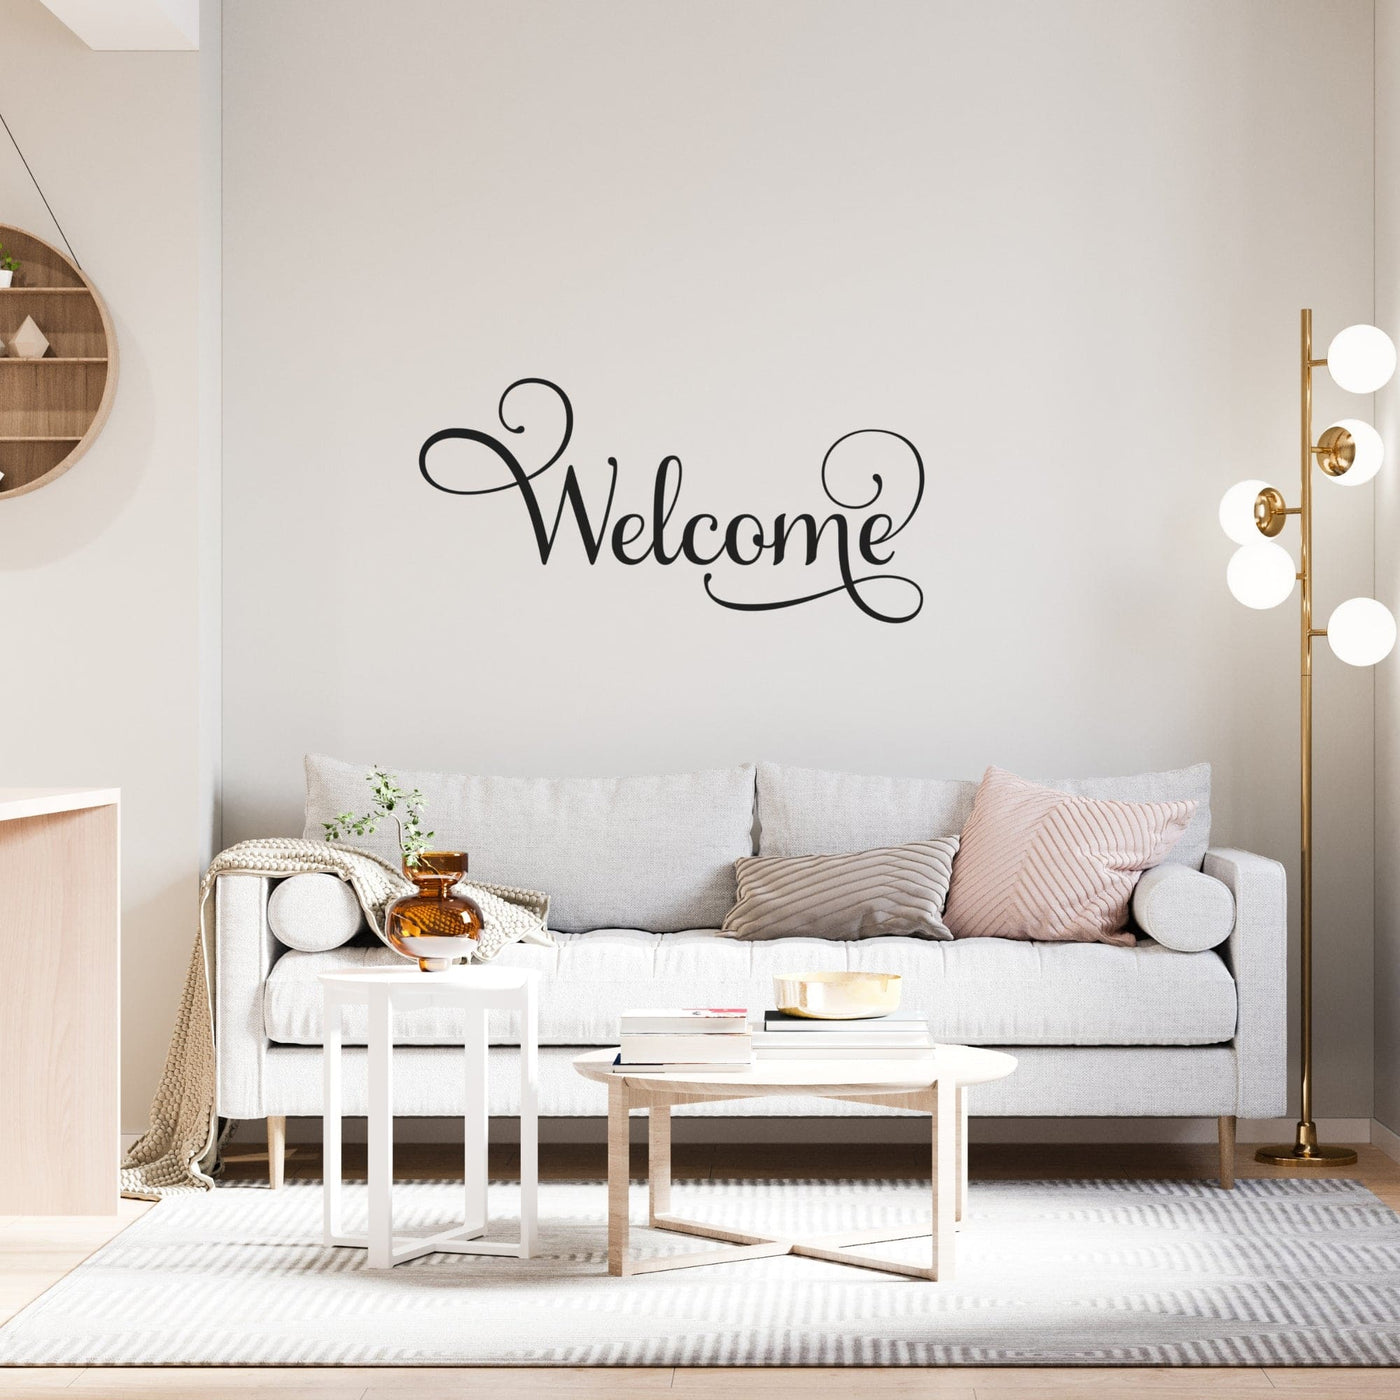 Decor - Welcome Removable Vinyl Wall Decal Easy Peel And Stick Wall Art -